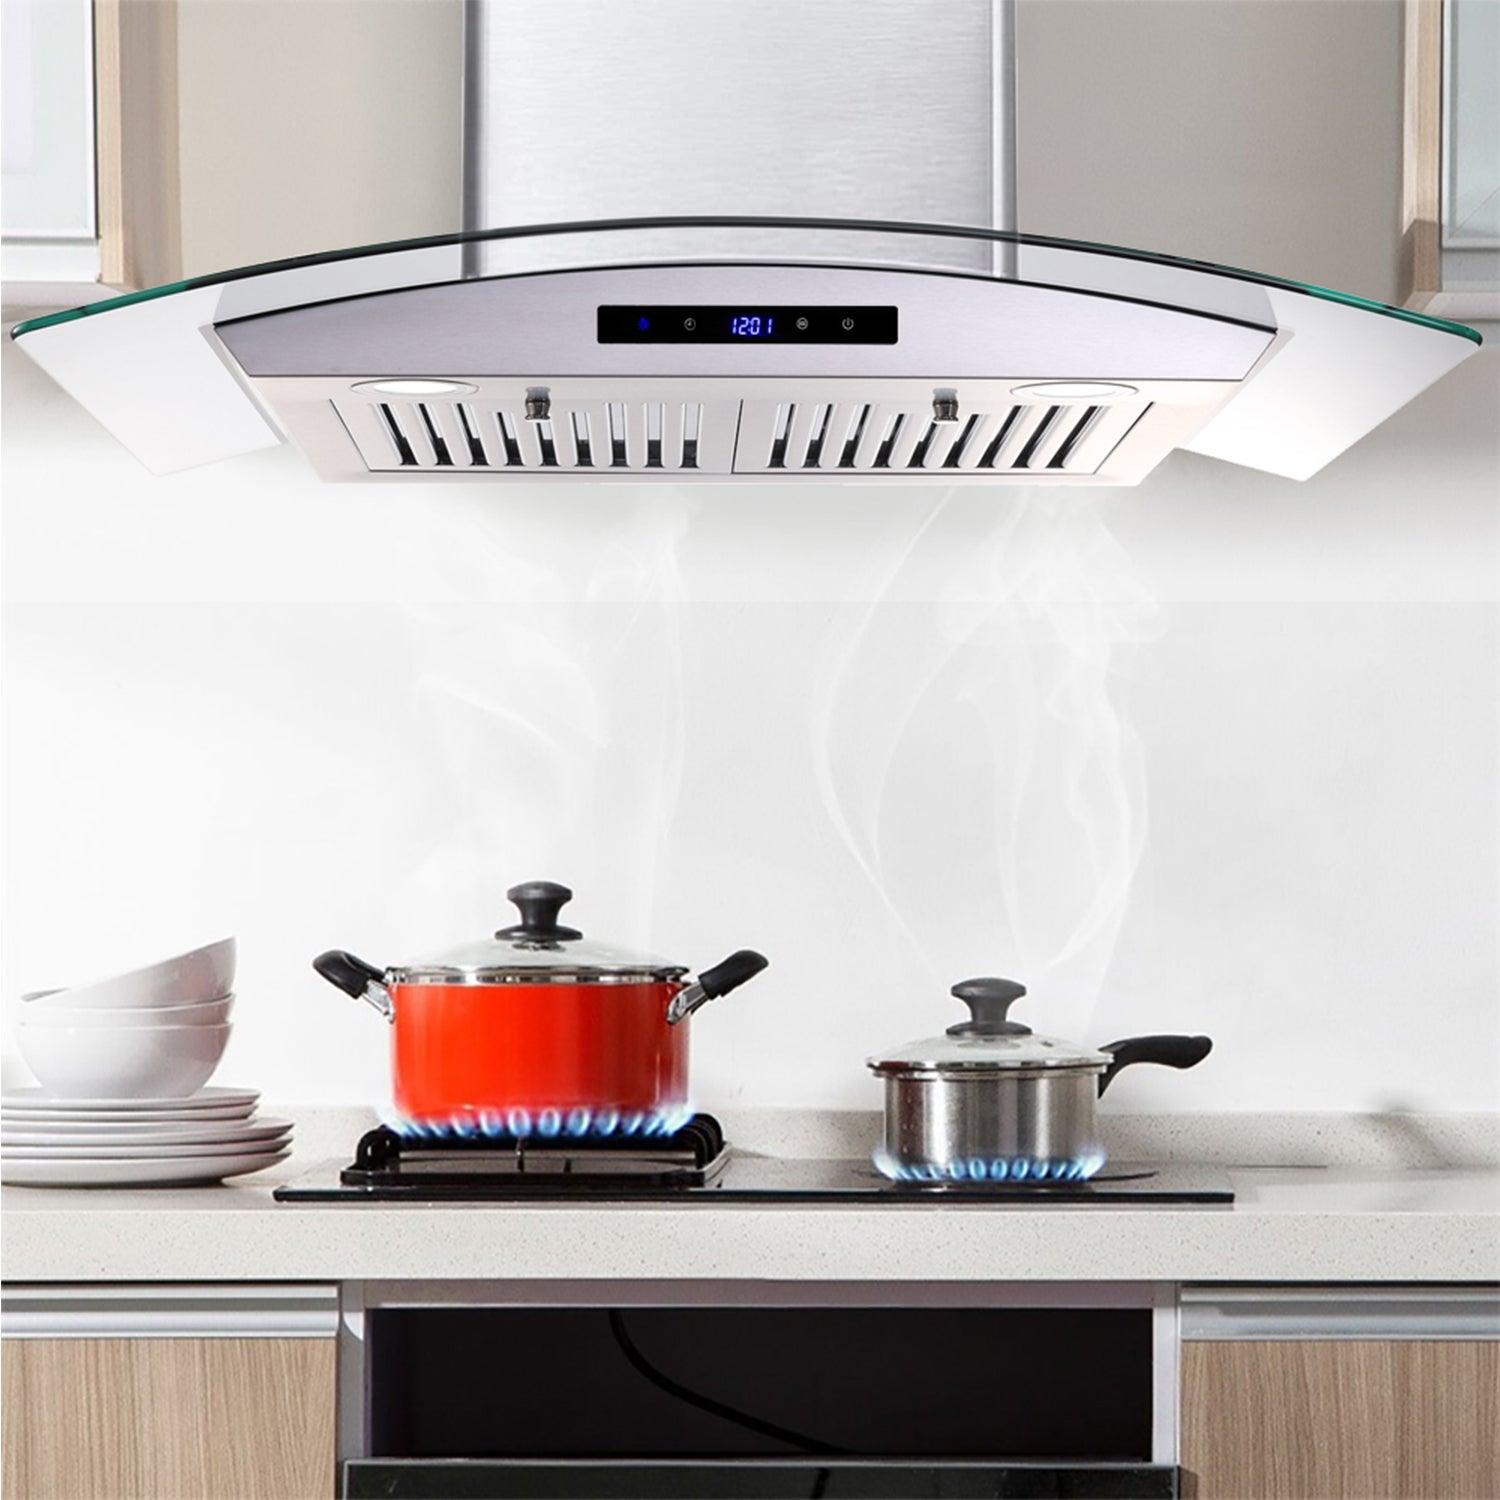 Tieasy 30 inch Wall Mount Range Hood 700 CFM Vent Hood Touch Control Stainless Steel Filters